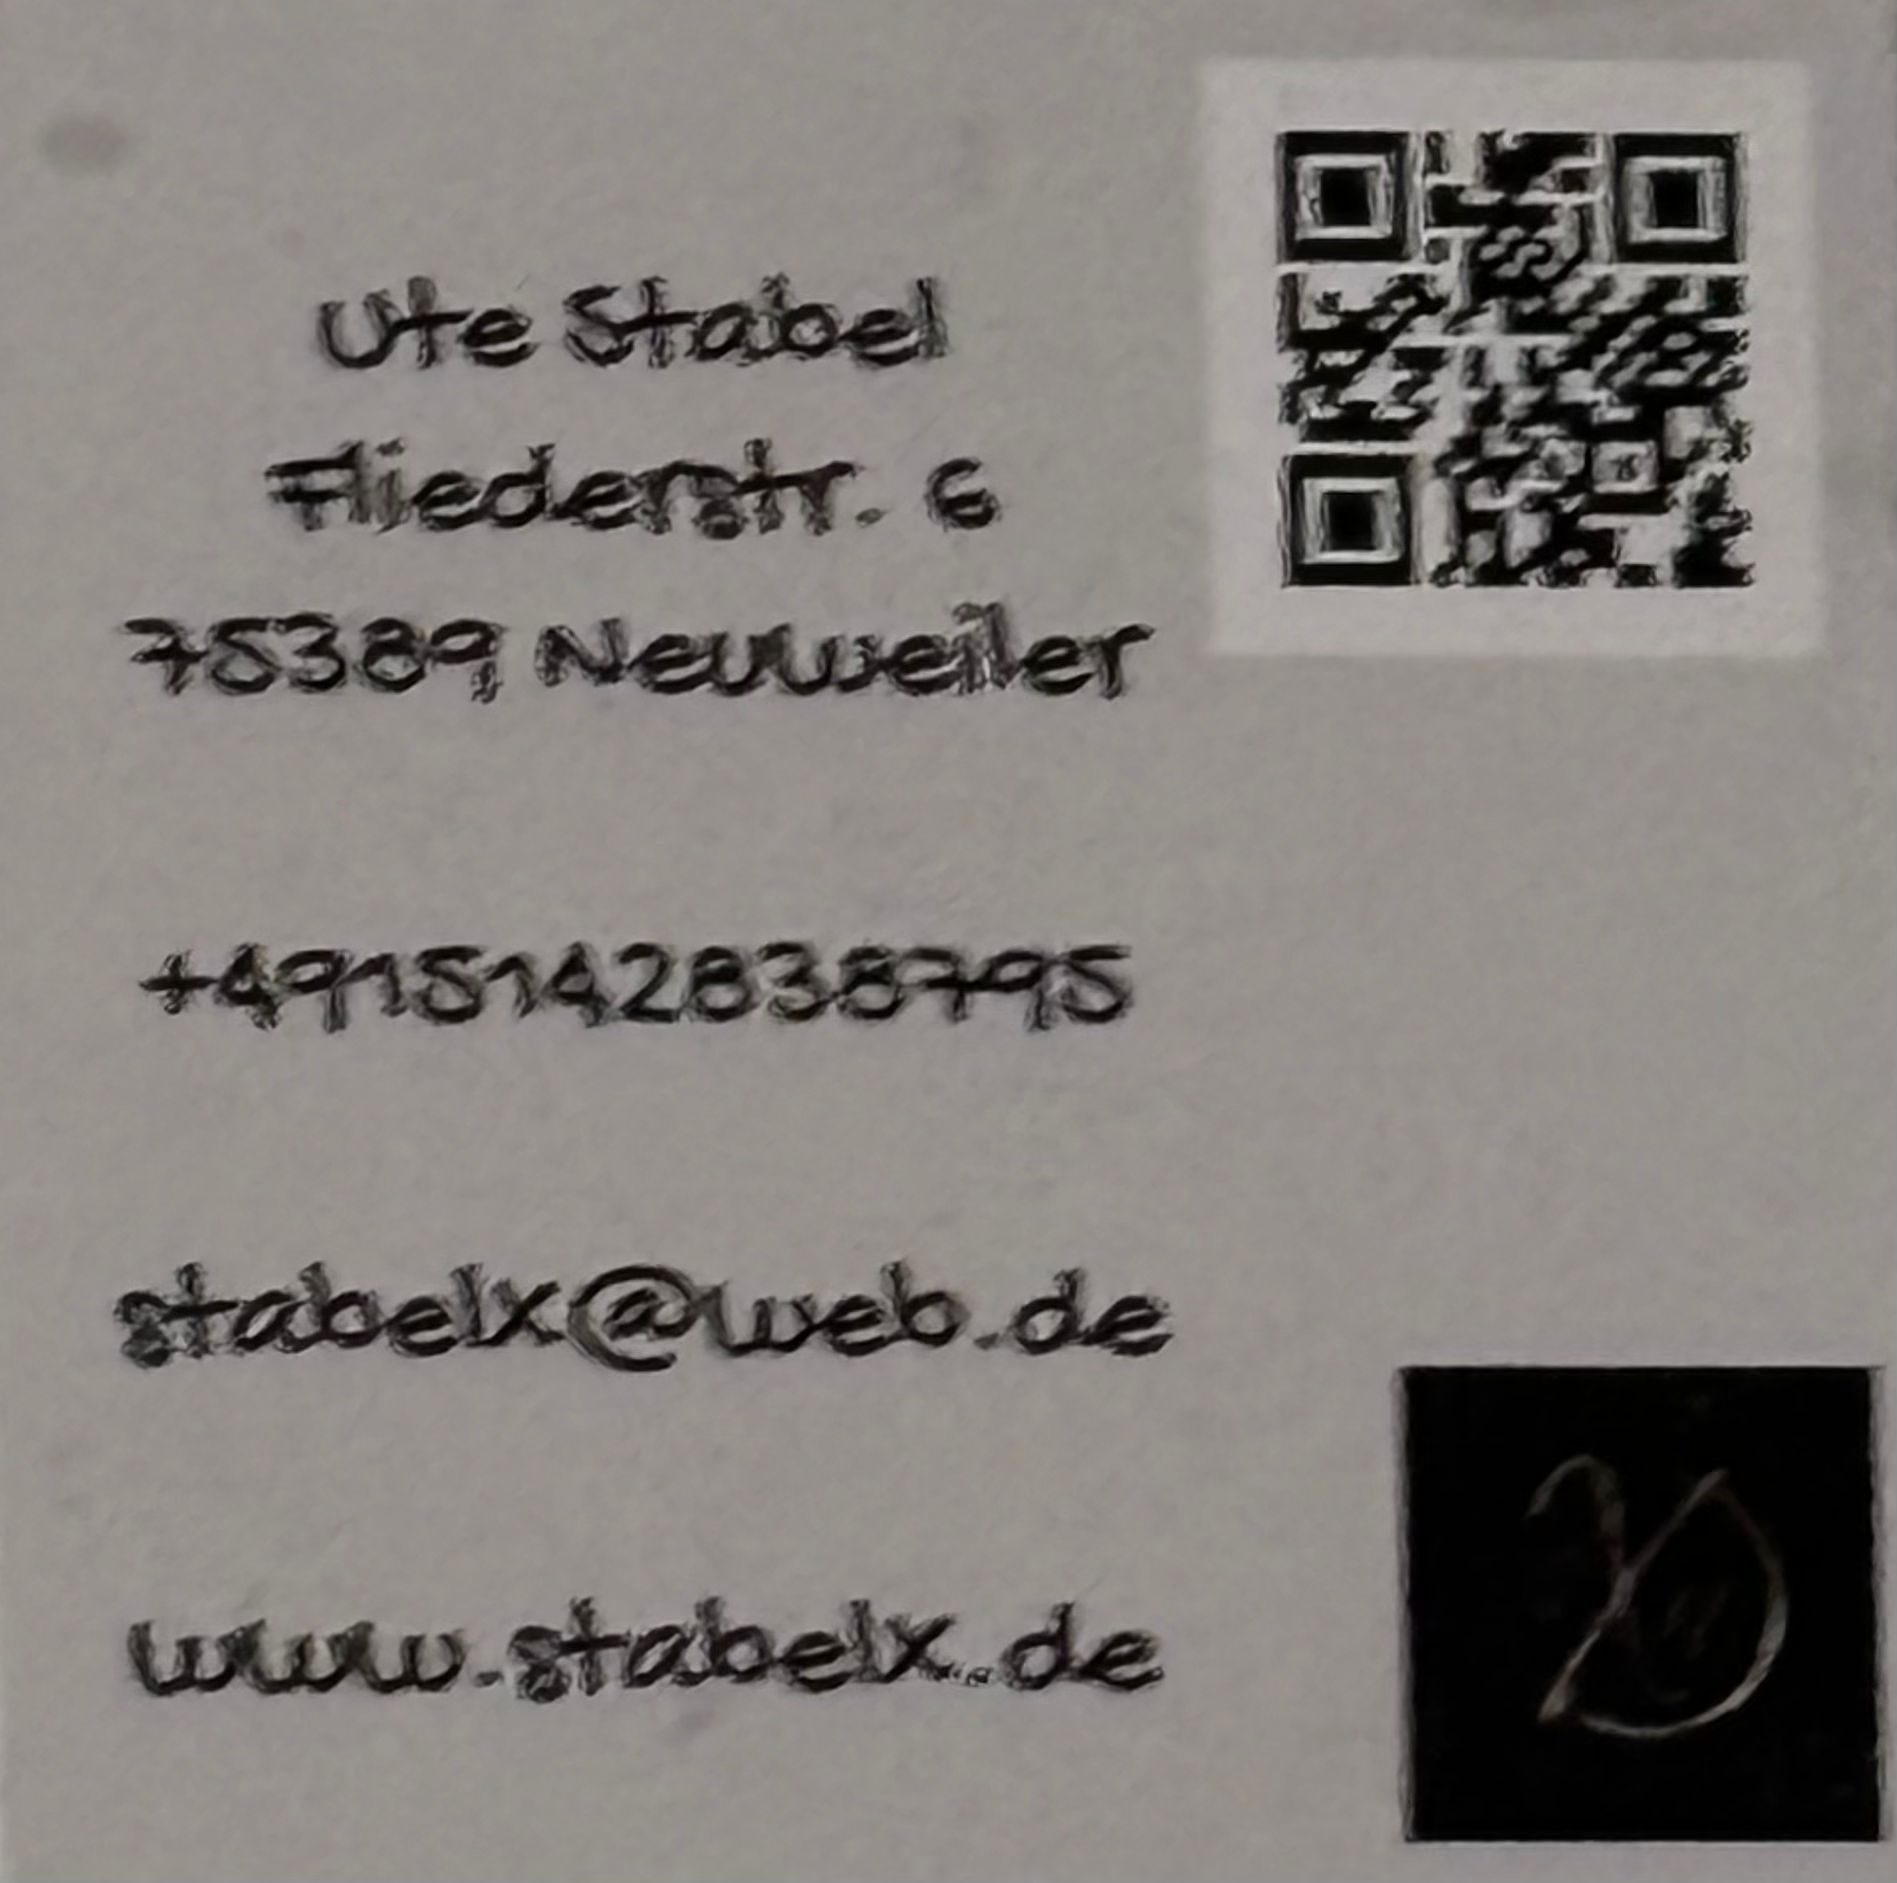 stabelx